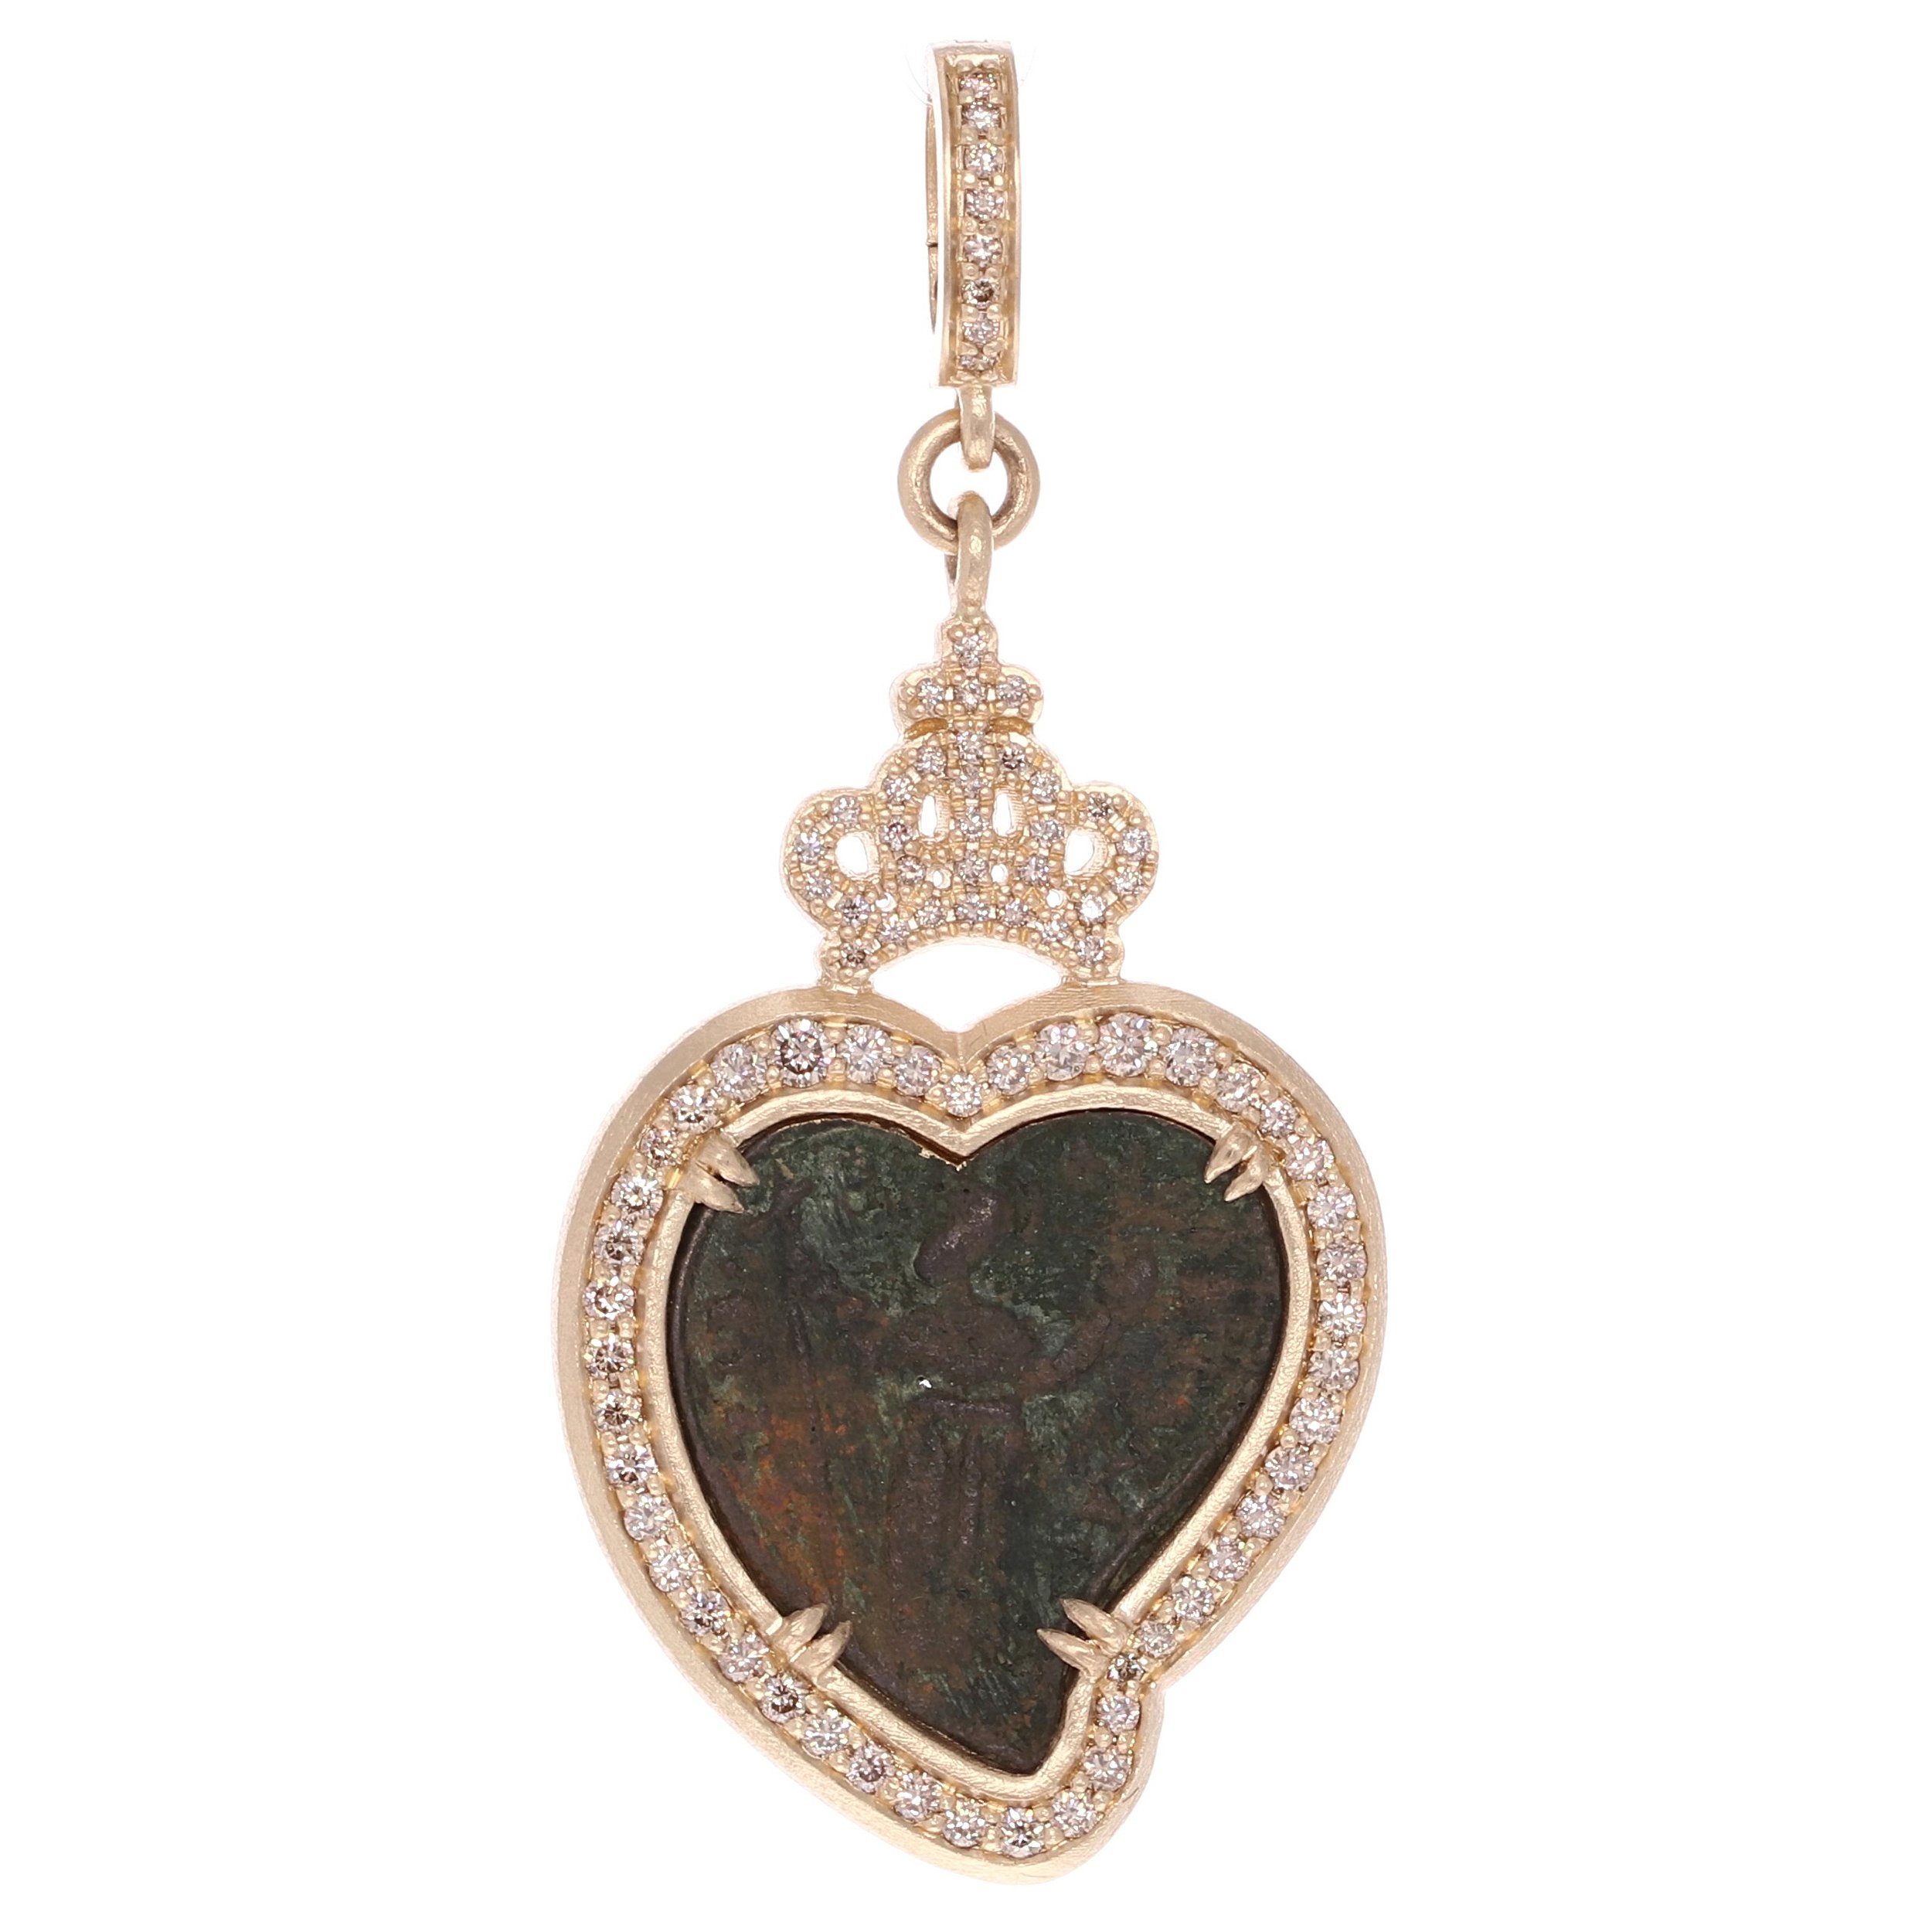 Ancient Unknown Saint Heart Shaped Medal Pendant